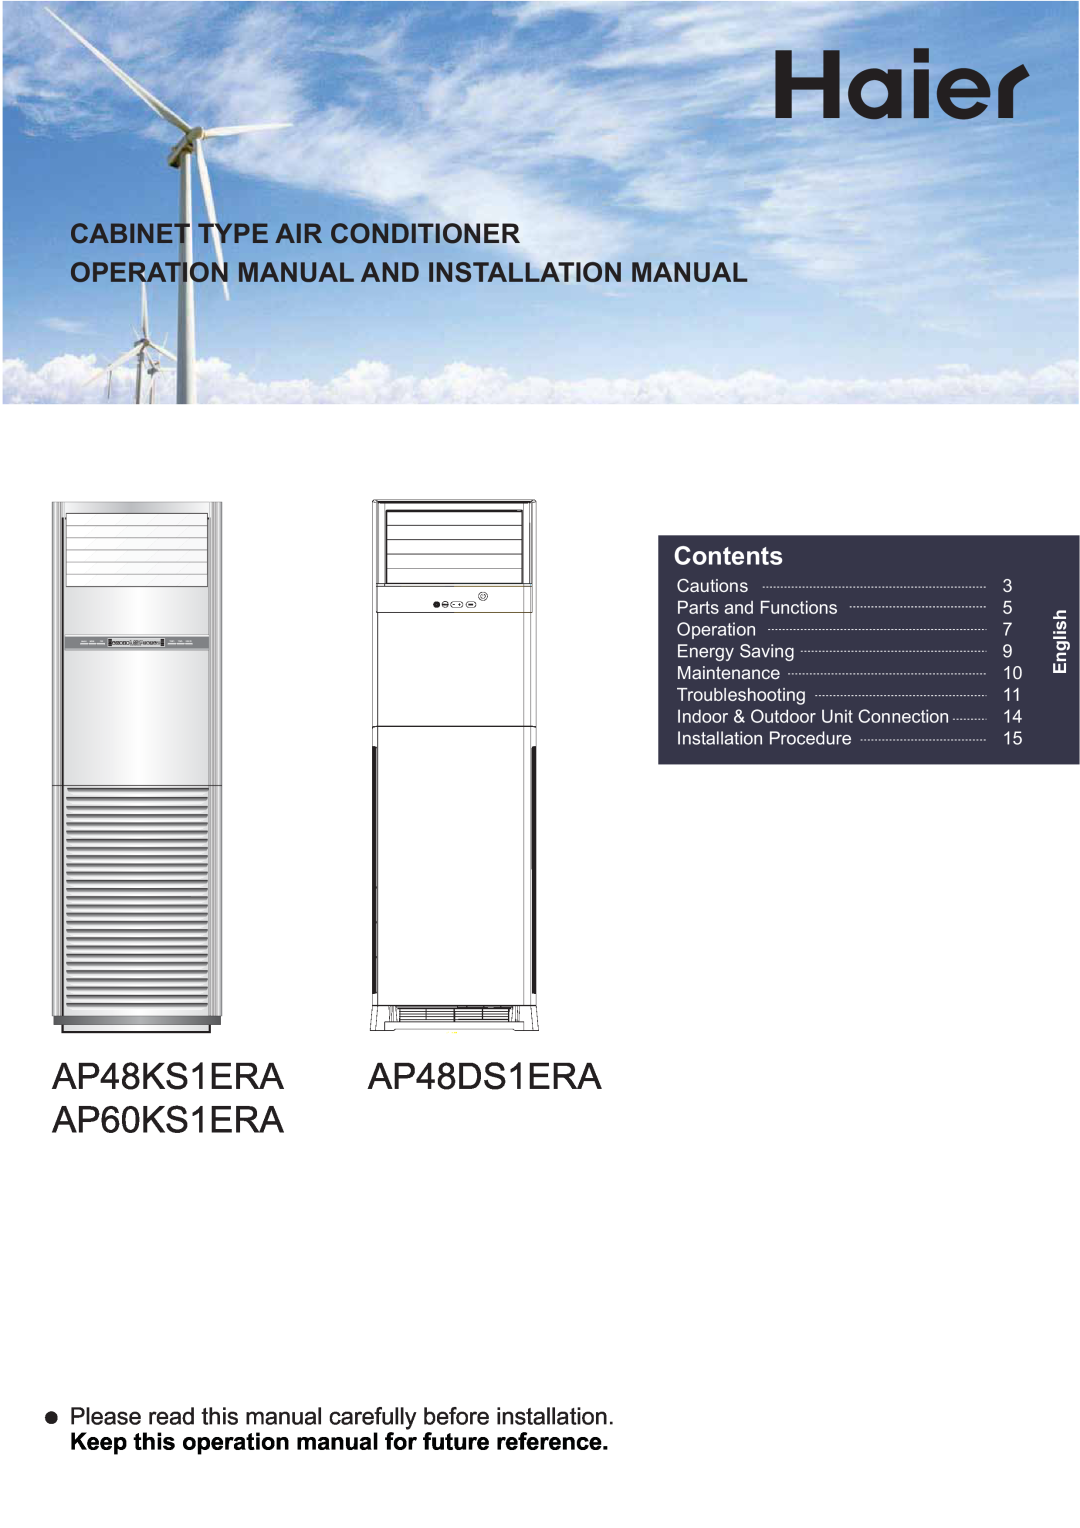 Haier AP48KS1ERA, AP48DS1ERA Cabinet Type Air Conditioner, Operation Manual And Installation Manual, Contents, English 